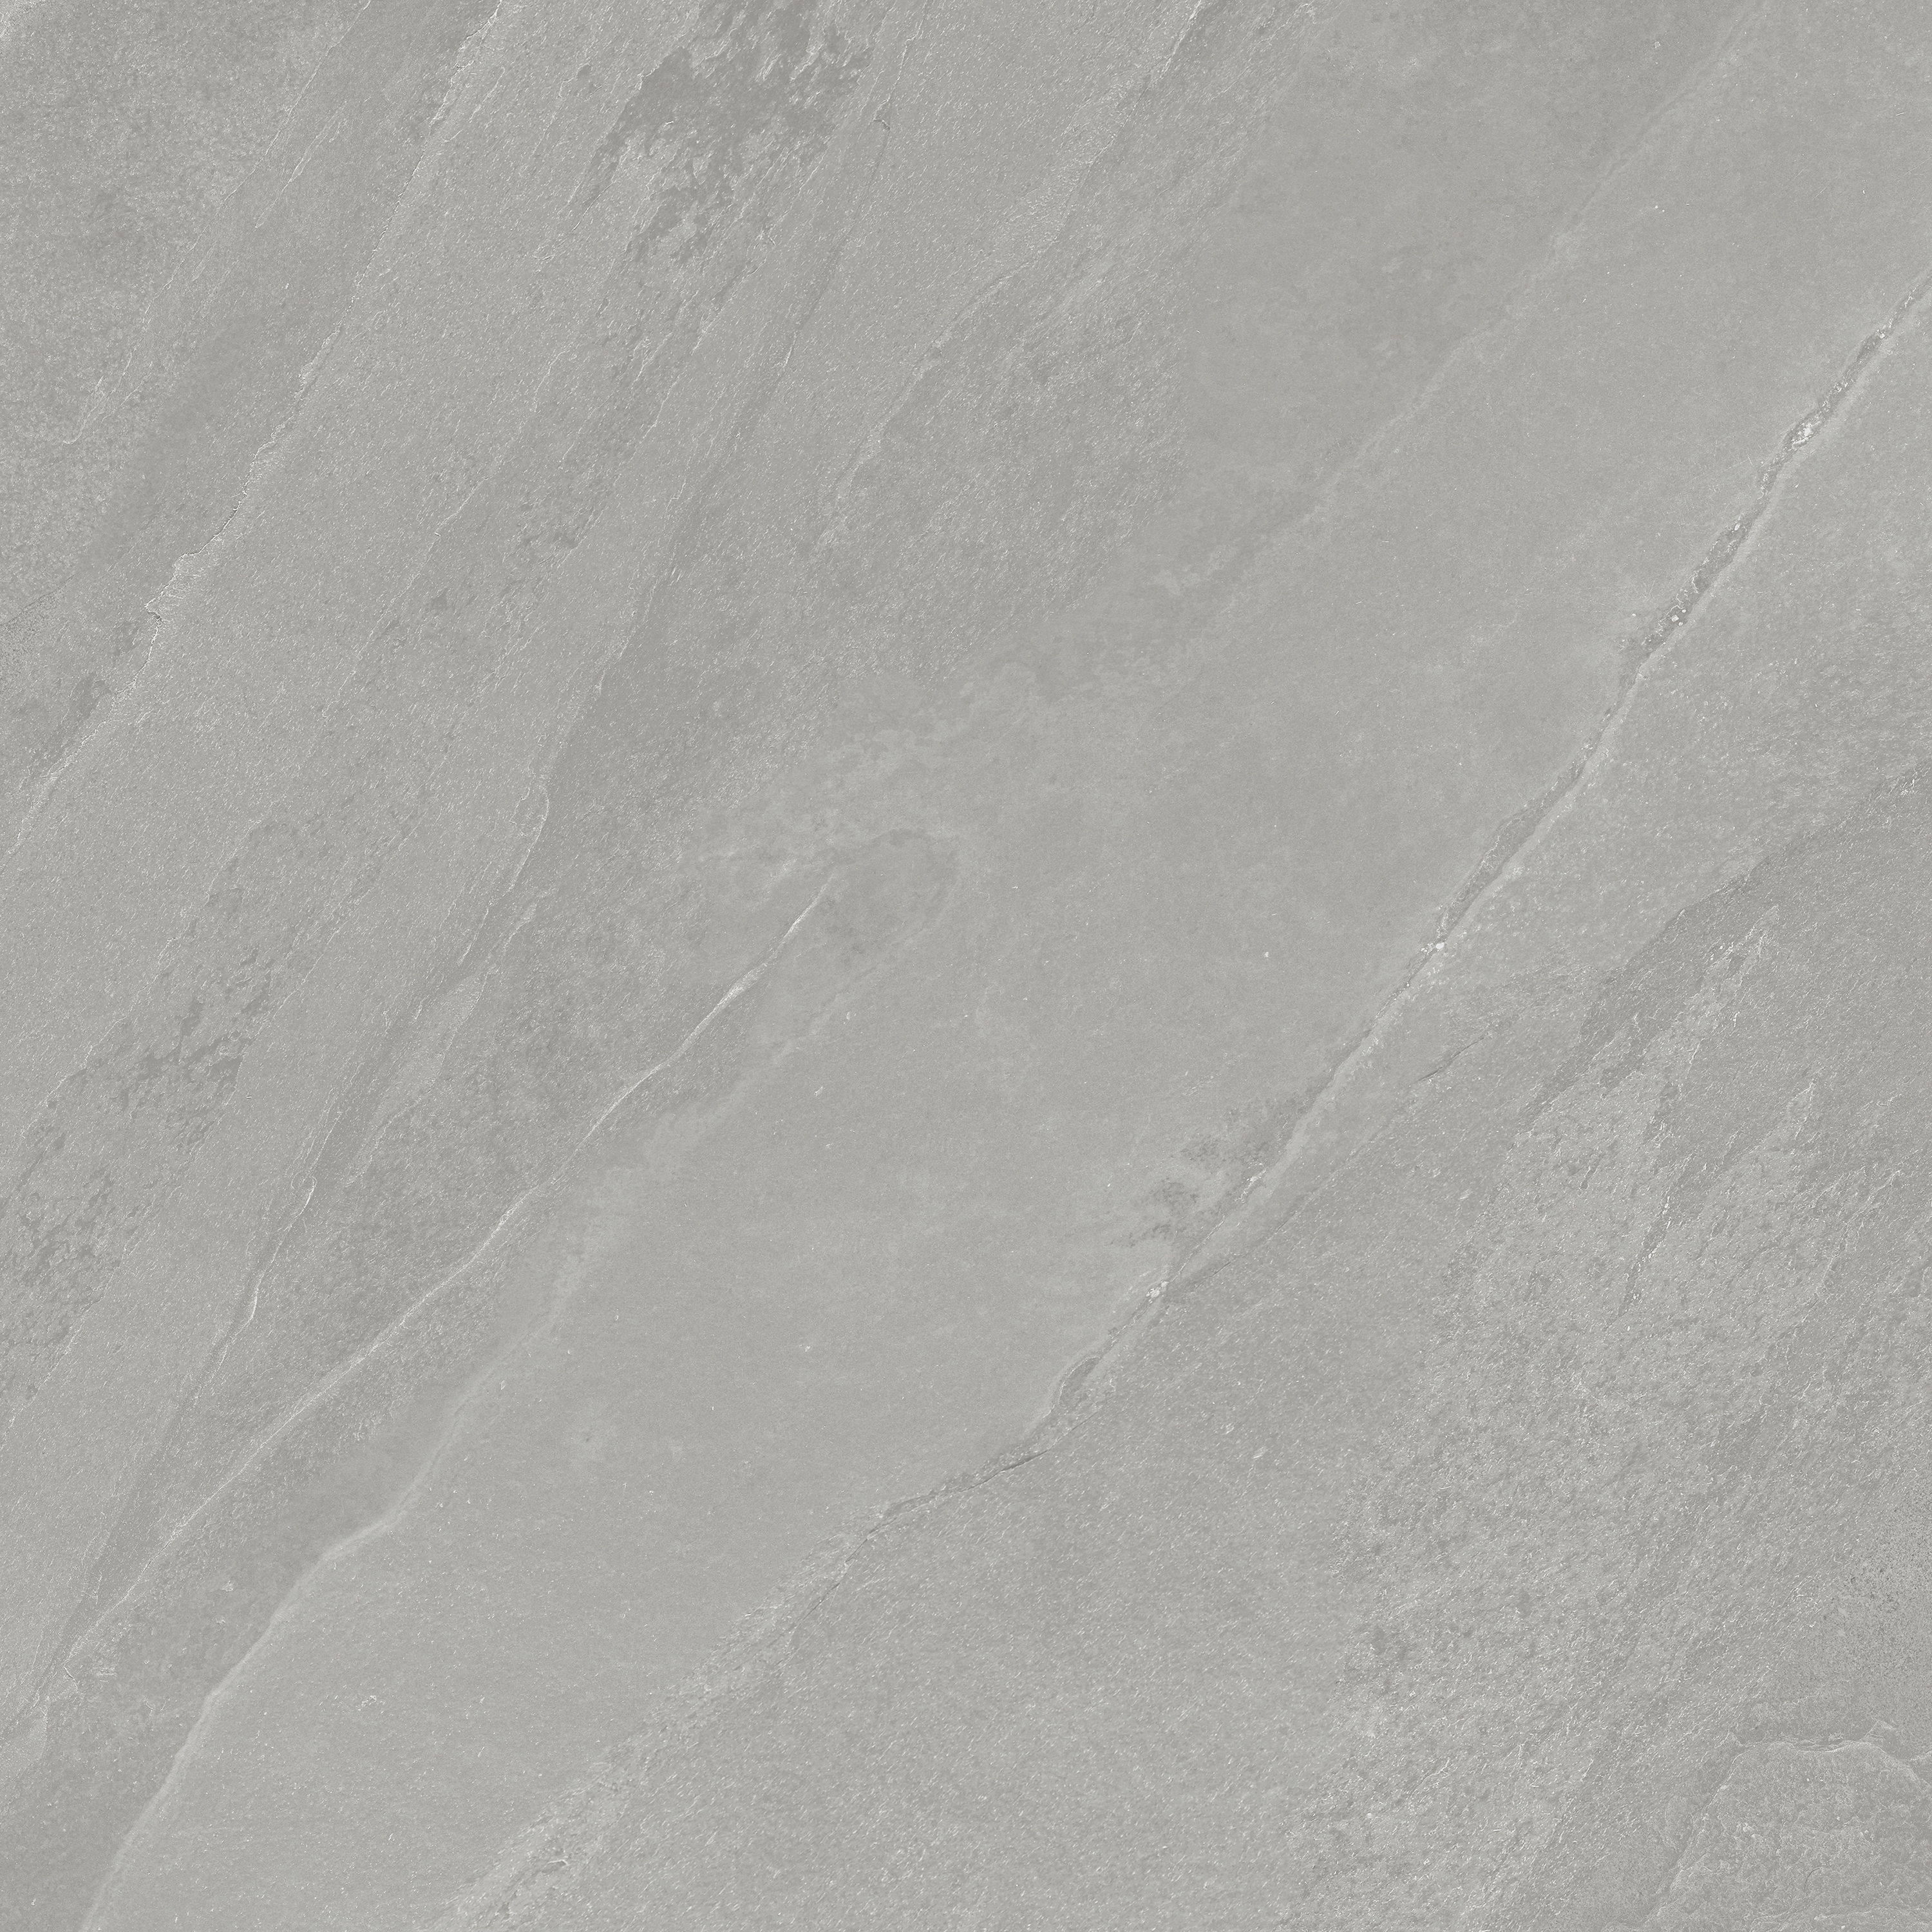 palladium pattern color body porcelain field tile from nord anatolia collection distributed by surface group international matte finish rectified edge 24x24 square shape